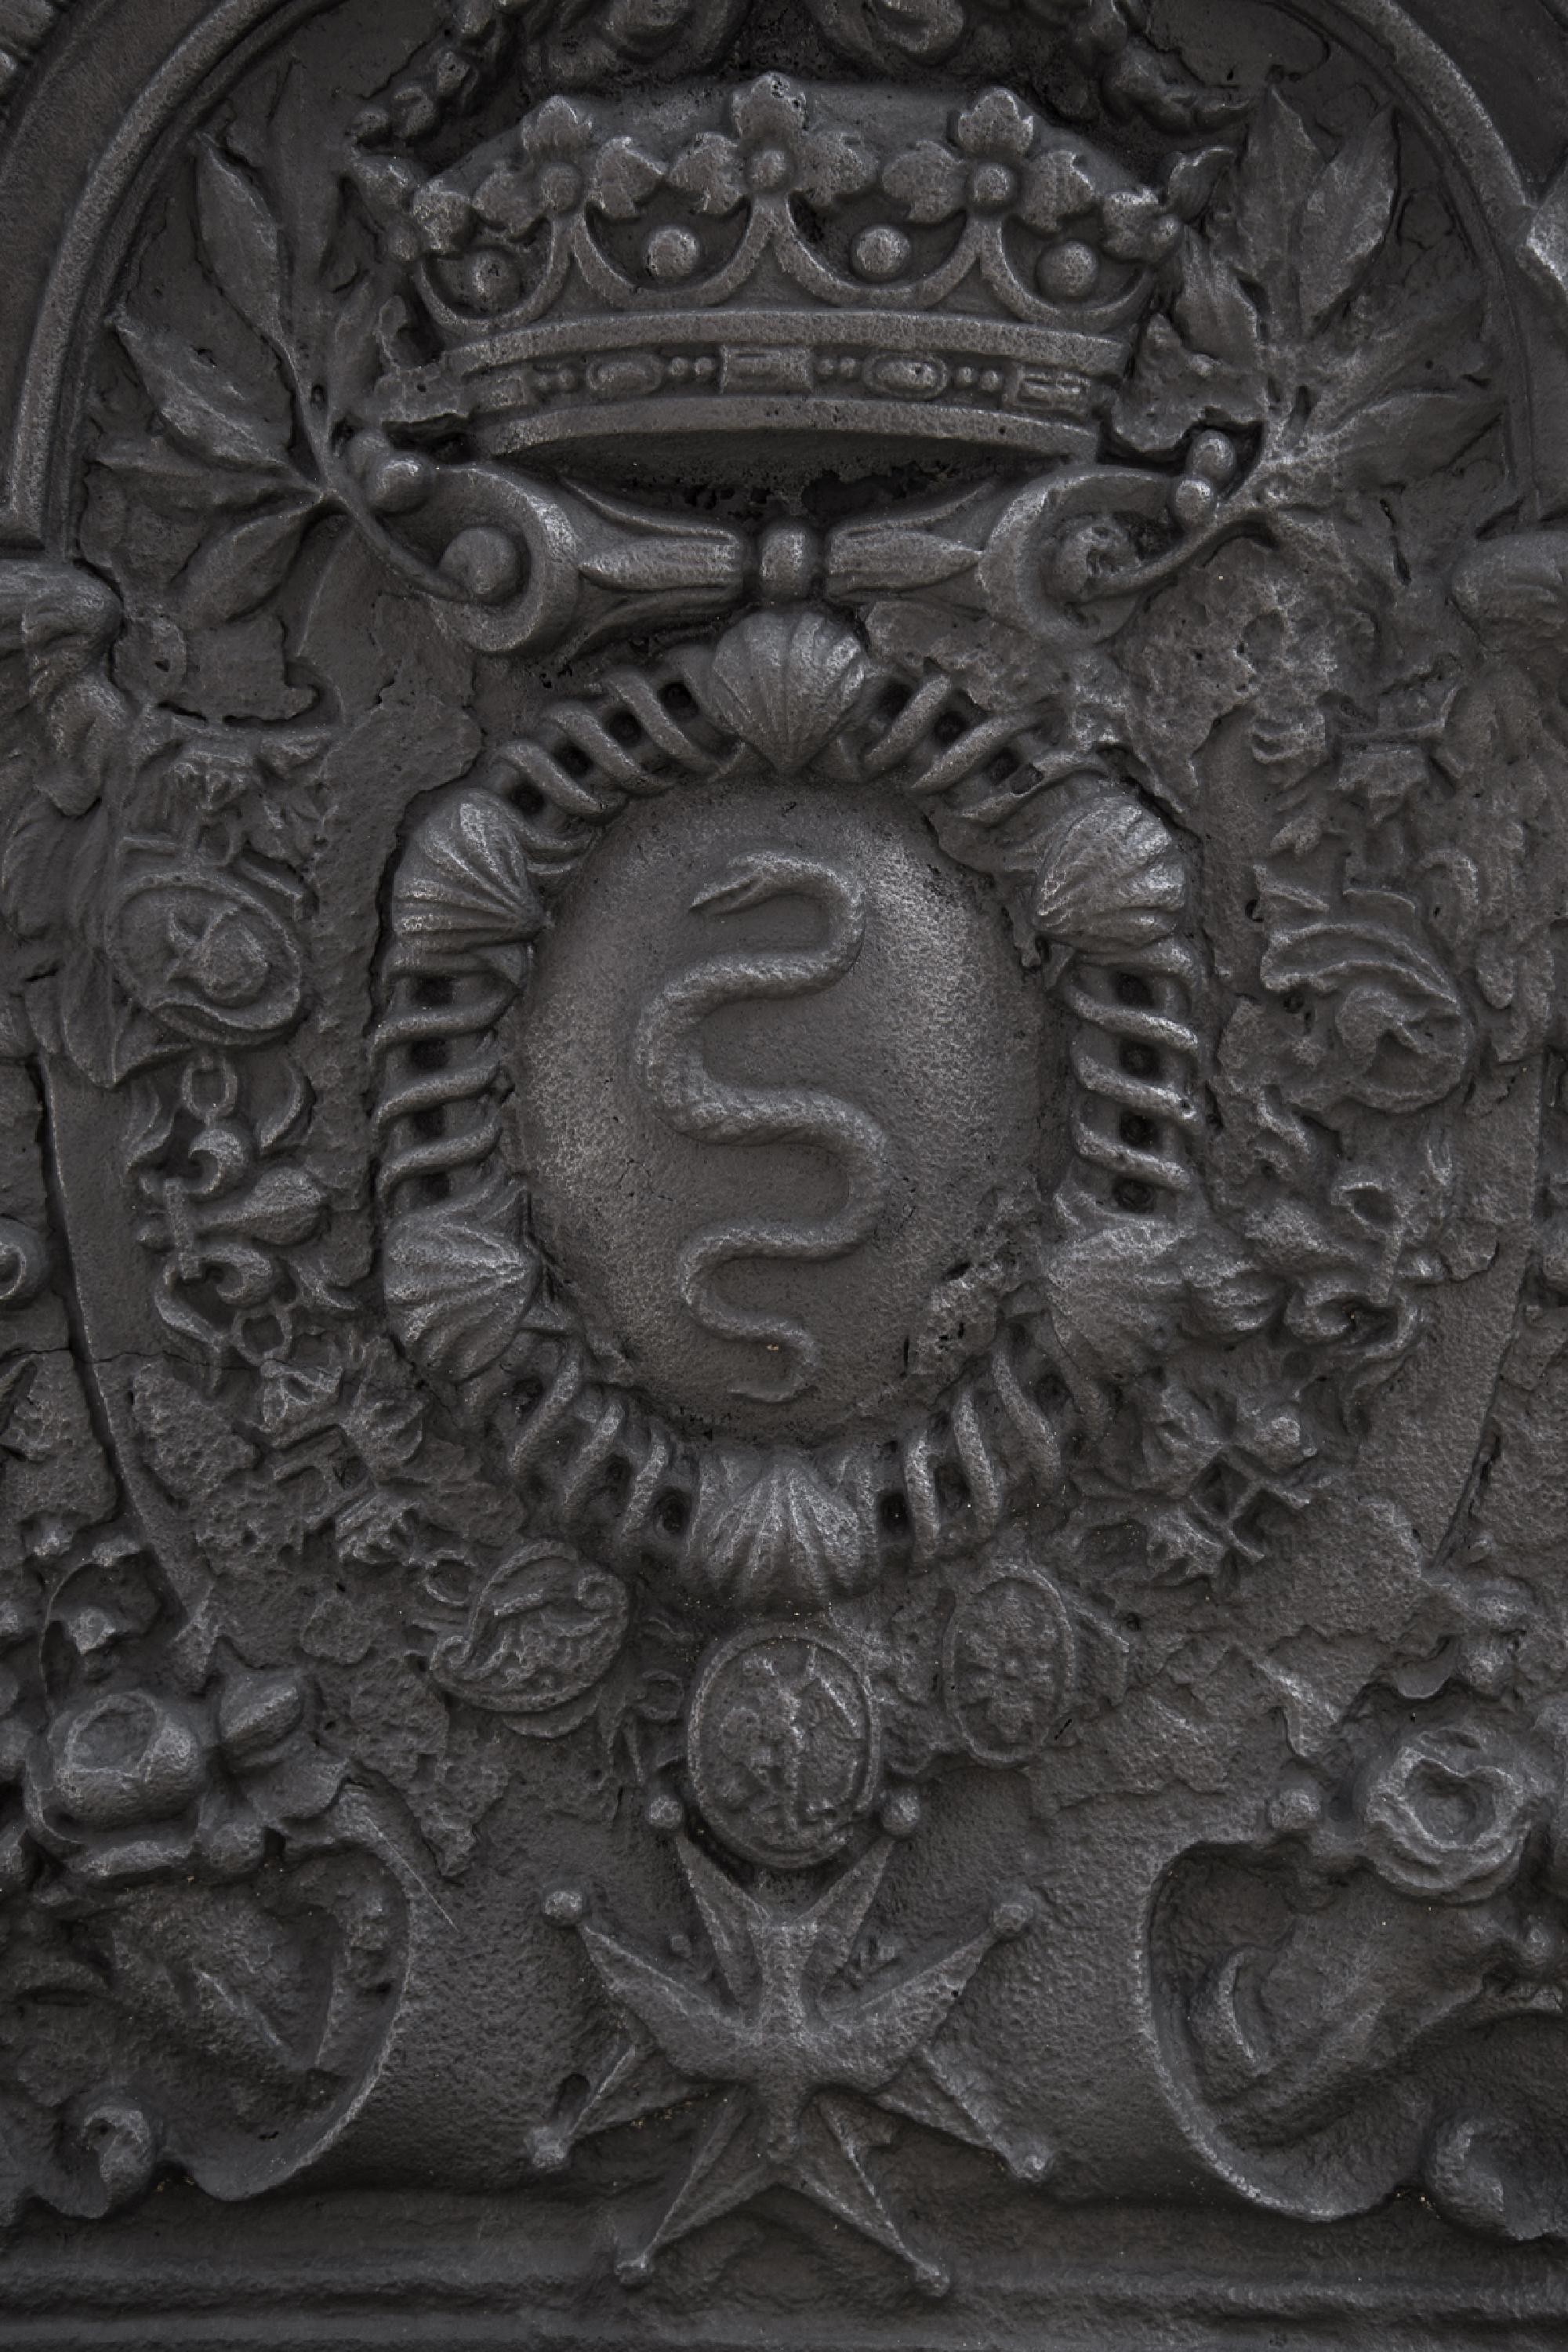 Louis XIV Cast iron fireback with the coat of arms of Colbert, marquis de Seignelay